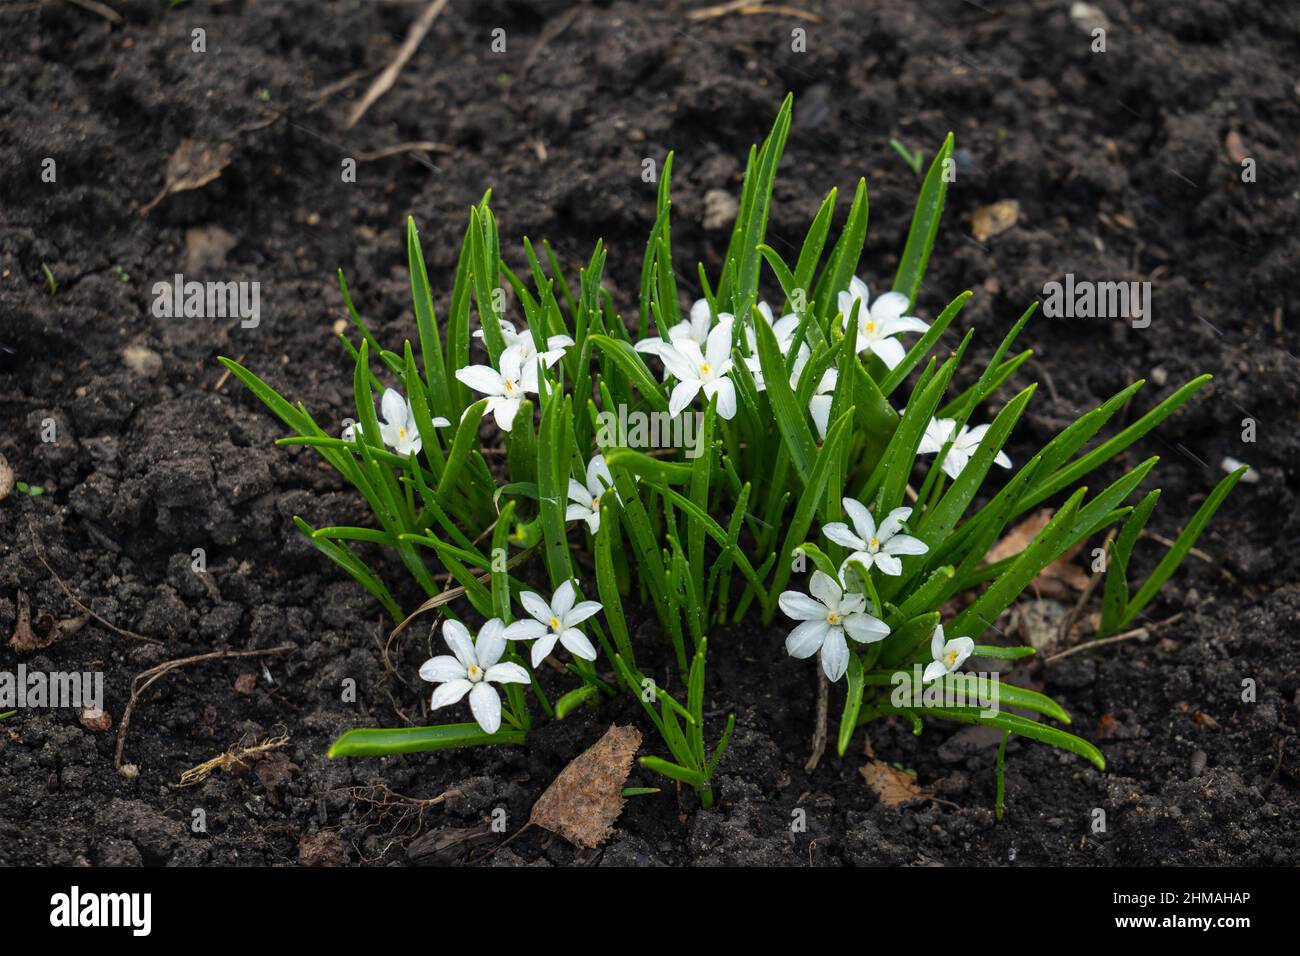 Ornithogalum grows in the garden. Perennial plants with linear basal leaves, growing from a bulb. Star-shaped flowers, Star of Bethlehem. The first sp Stock Photo